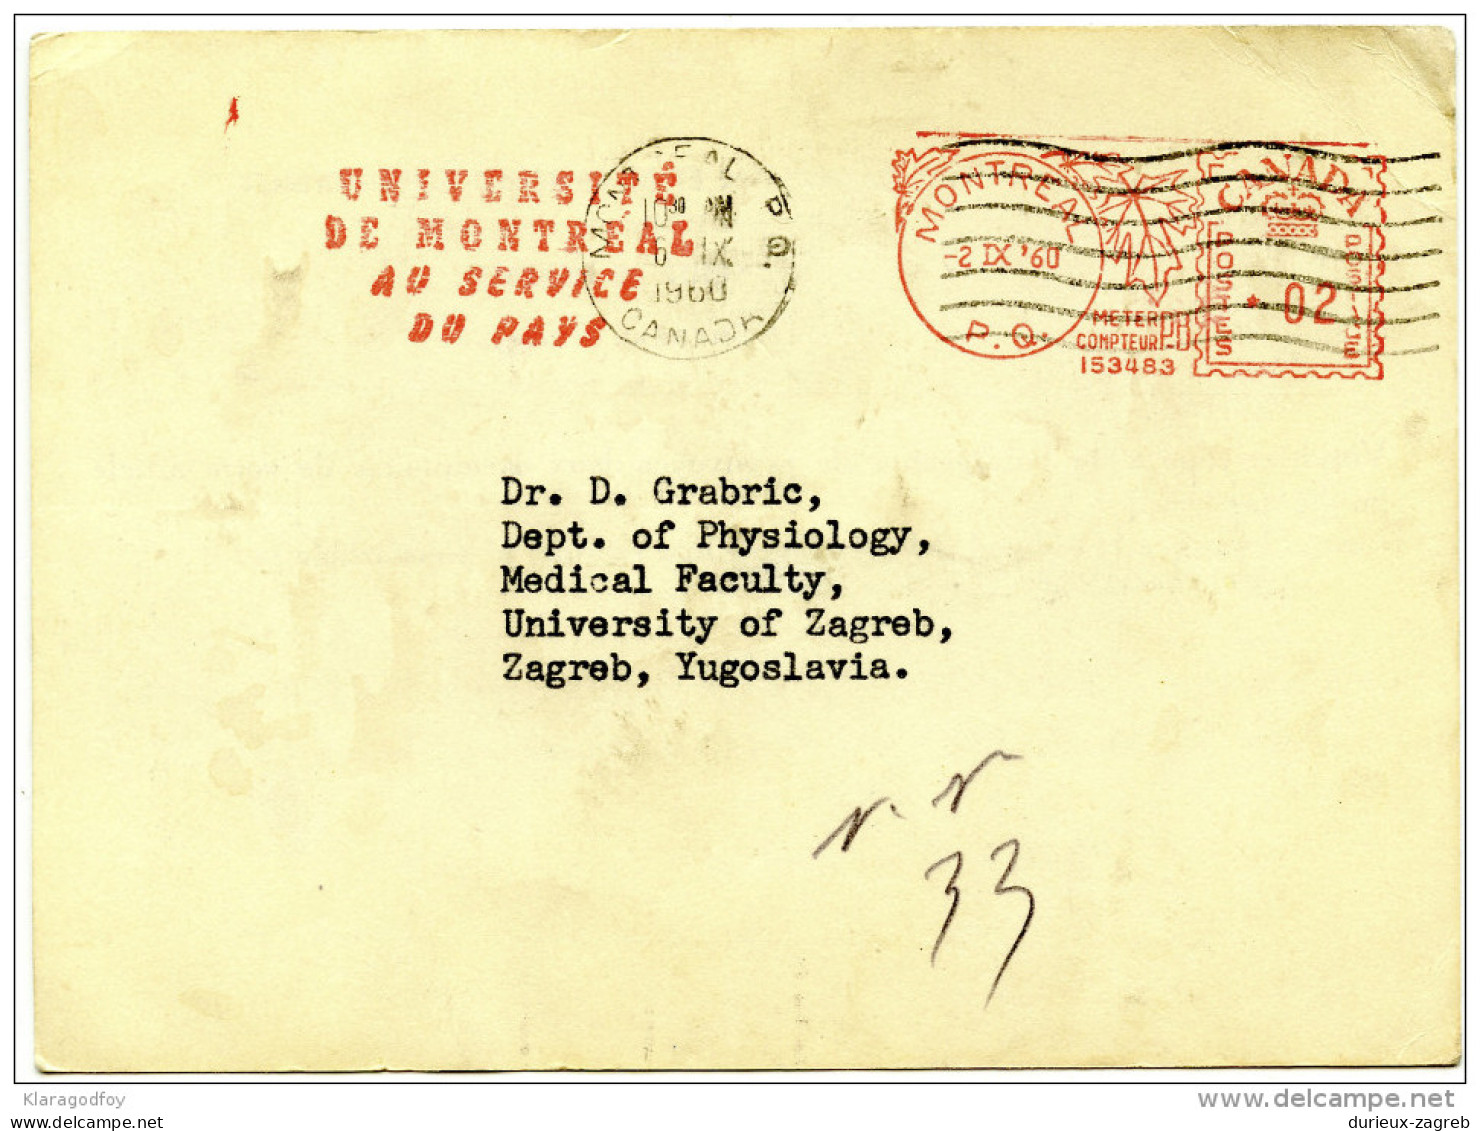 Canada Meter Stamp And Slogan Postmark Montreal On Card Travelled 1960 To Yugoslavia Bb160115 - Automatenmarken (ATM) - Stic'n'Tic